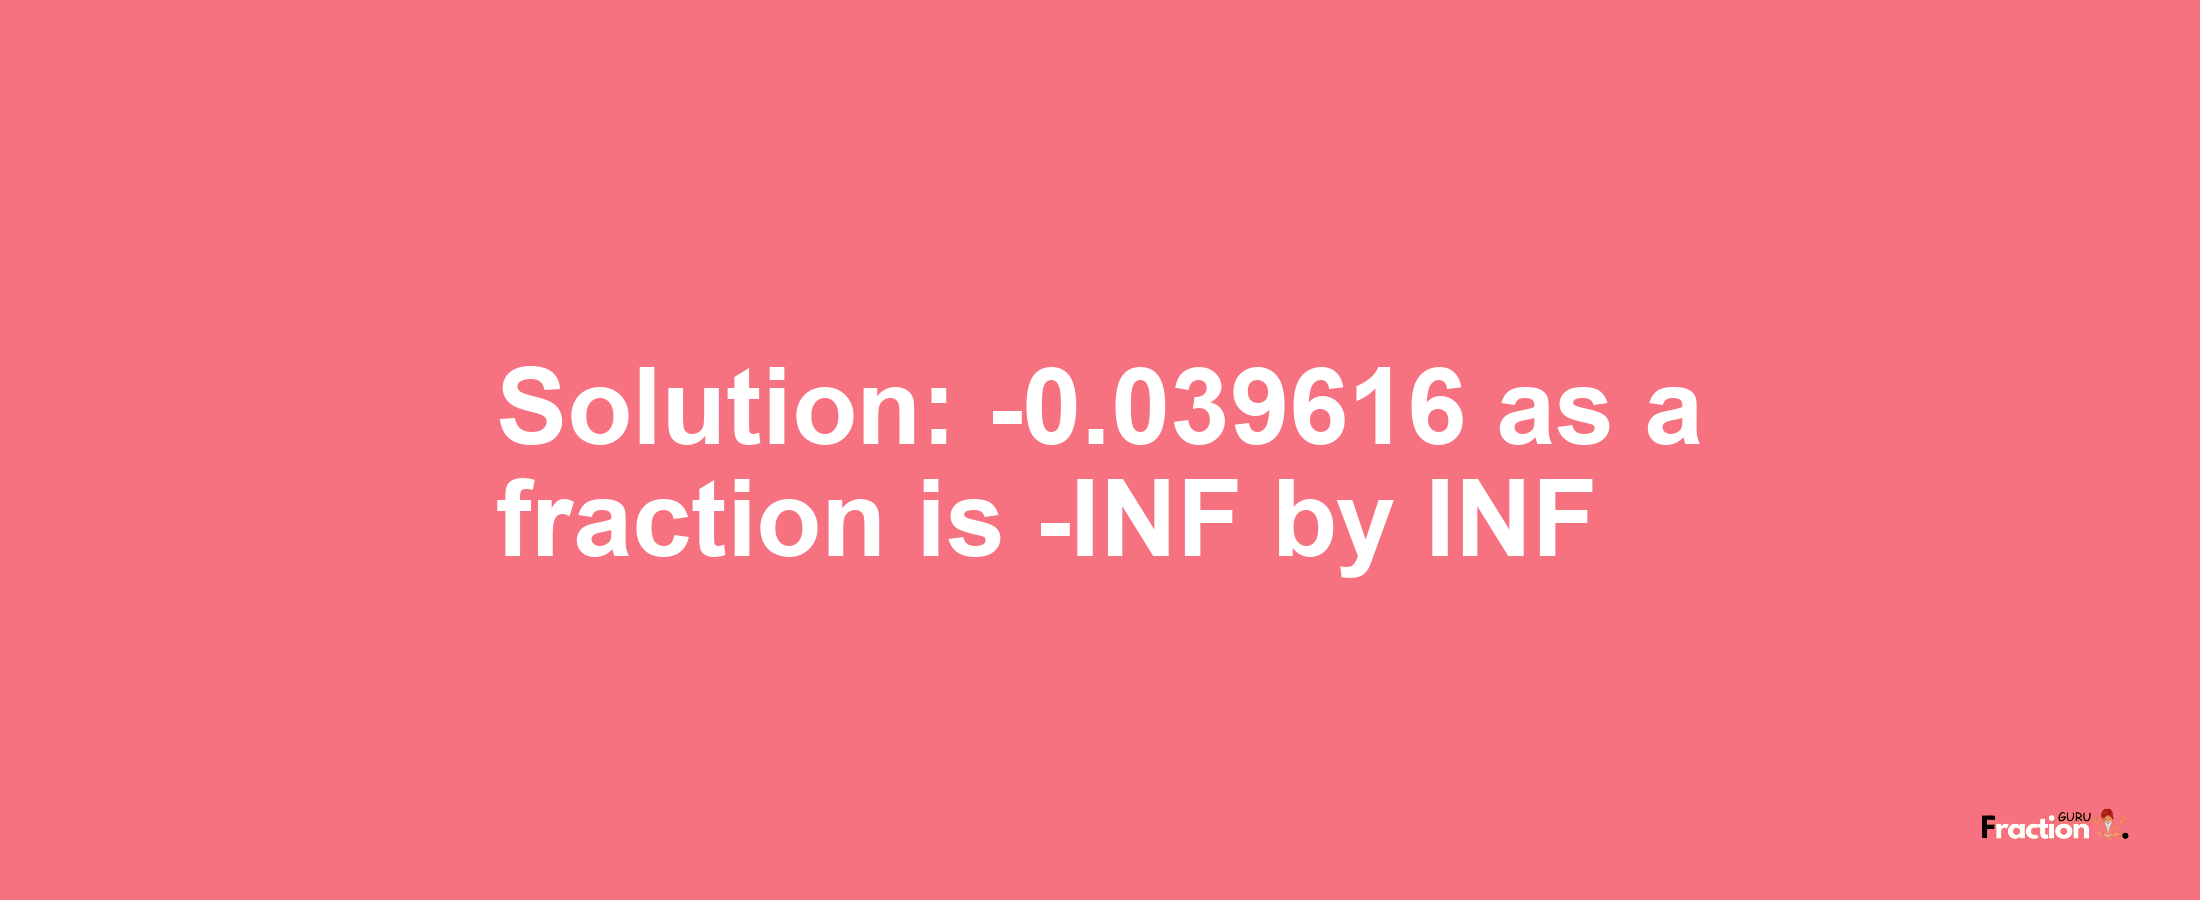 Solution:-0.039616 as a fraction is -INF/INF